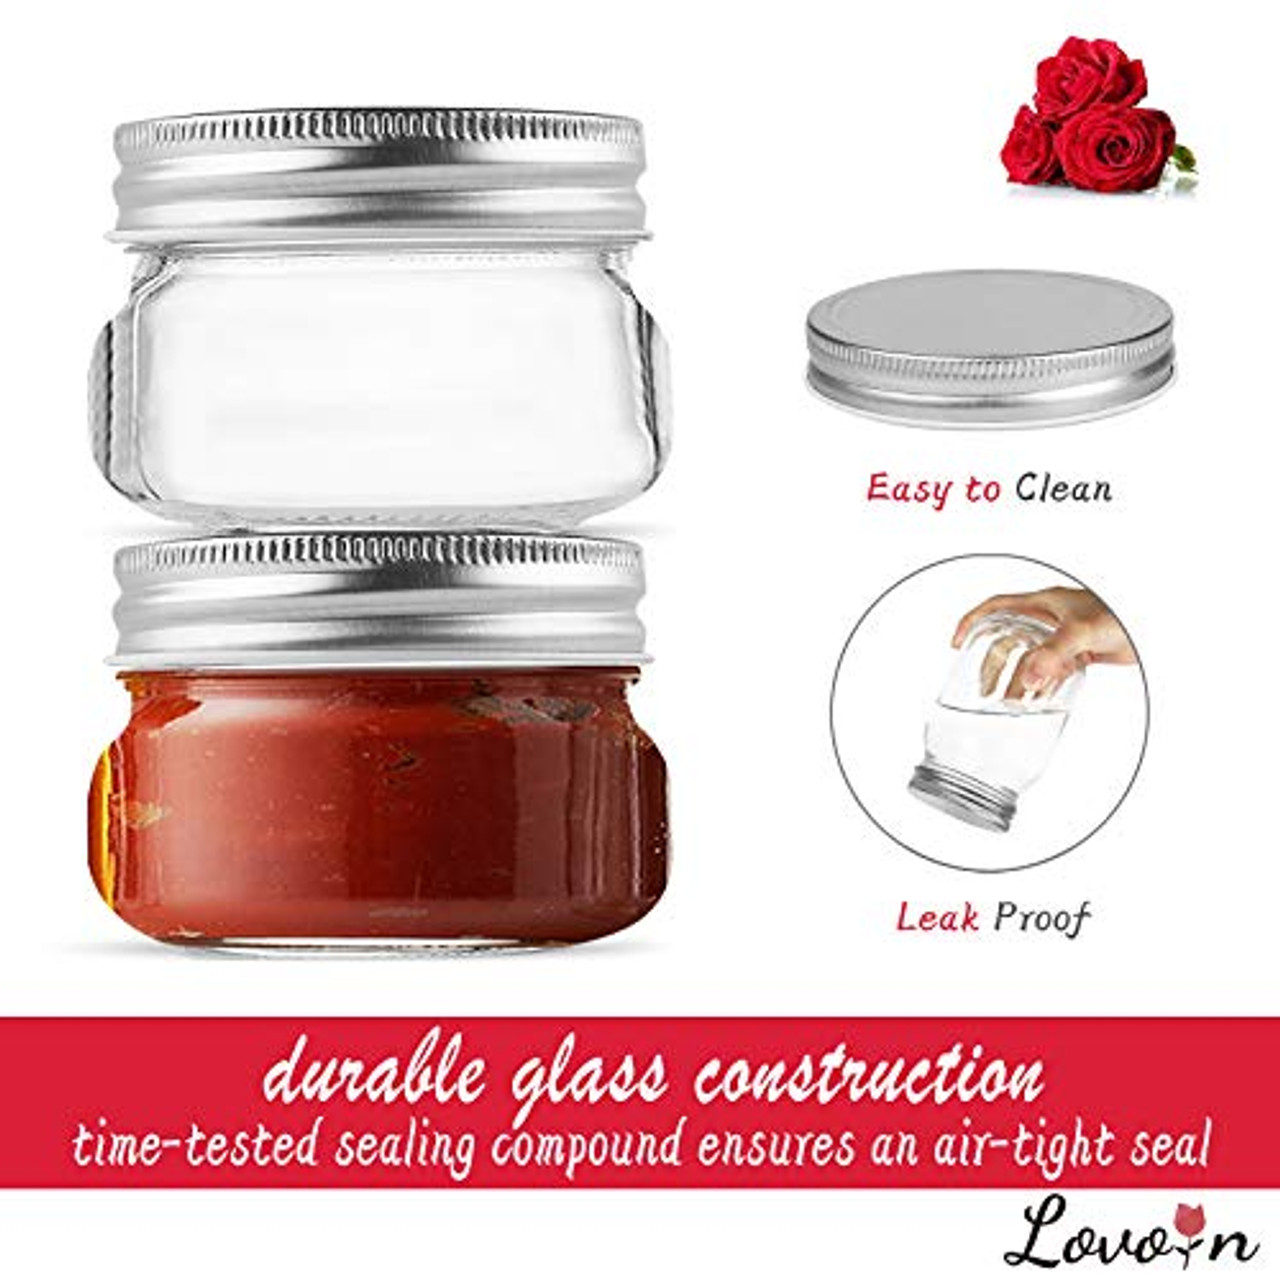 12 Pack, 8 OZ Thick Glass Jars with Lids, Clear Candle Jars with 12 Metal  Lids